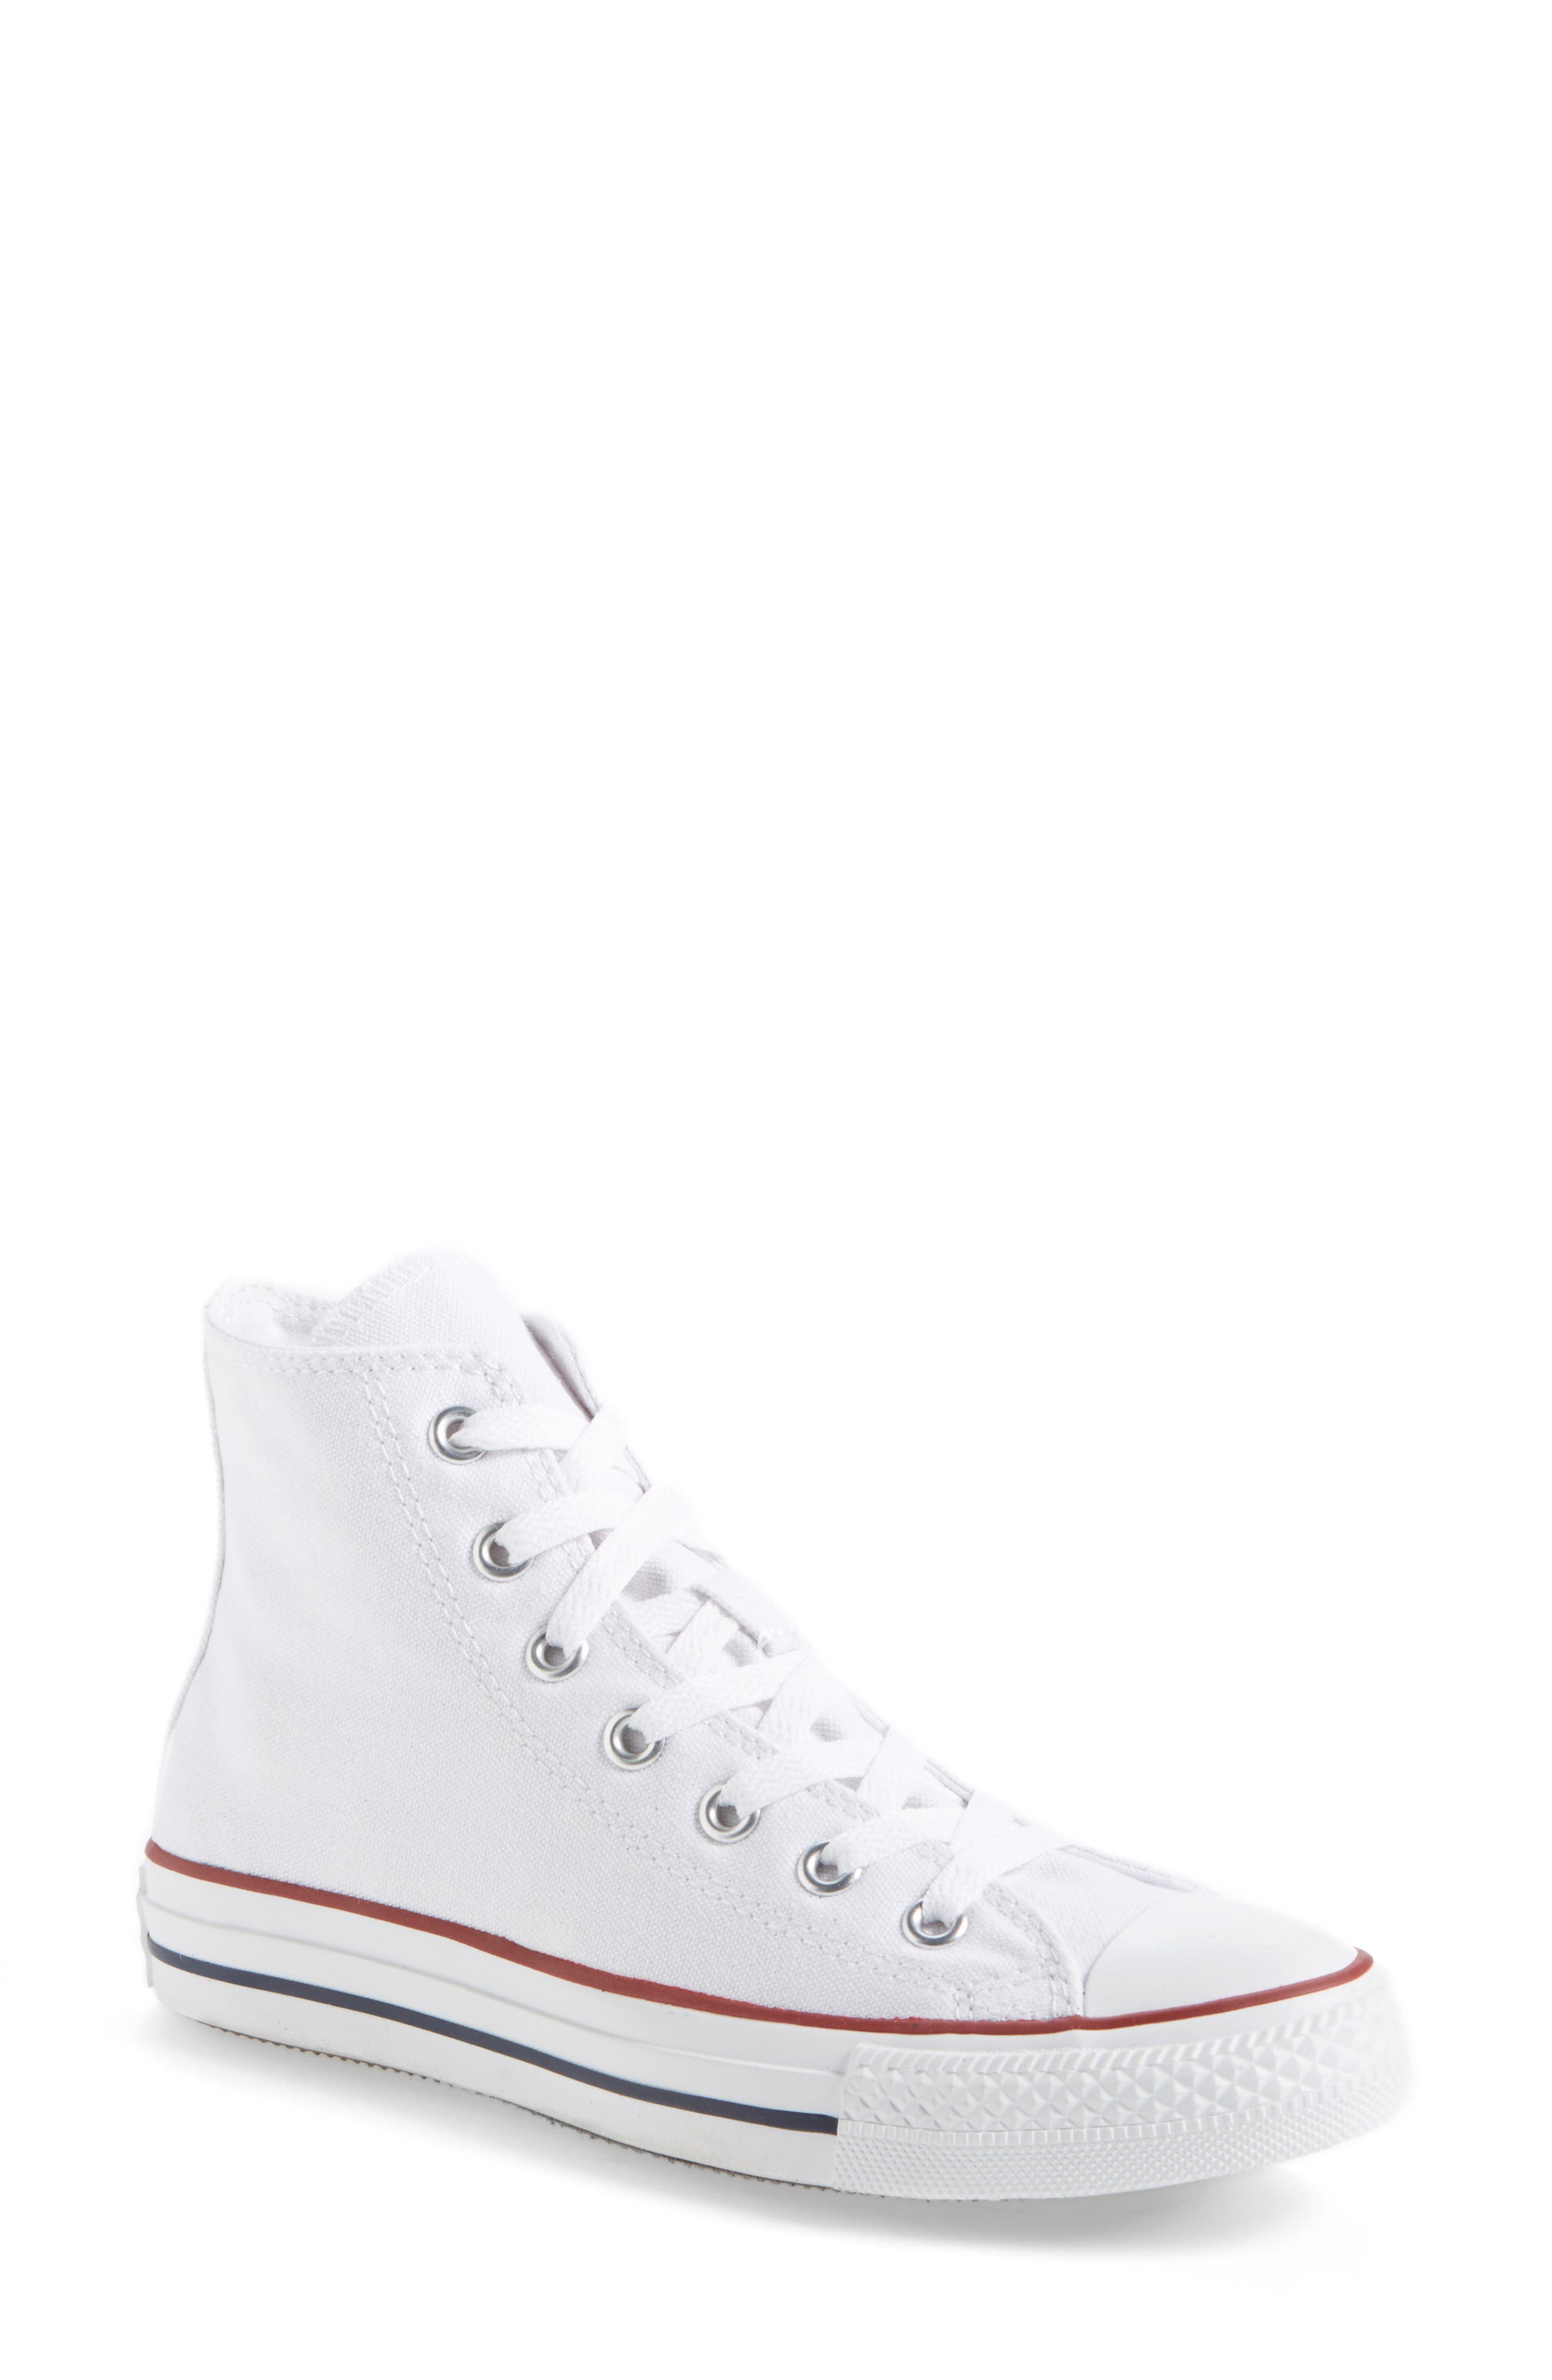 what size to get in converse